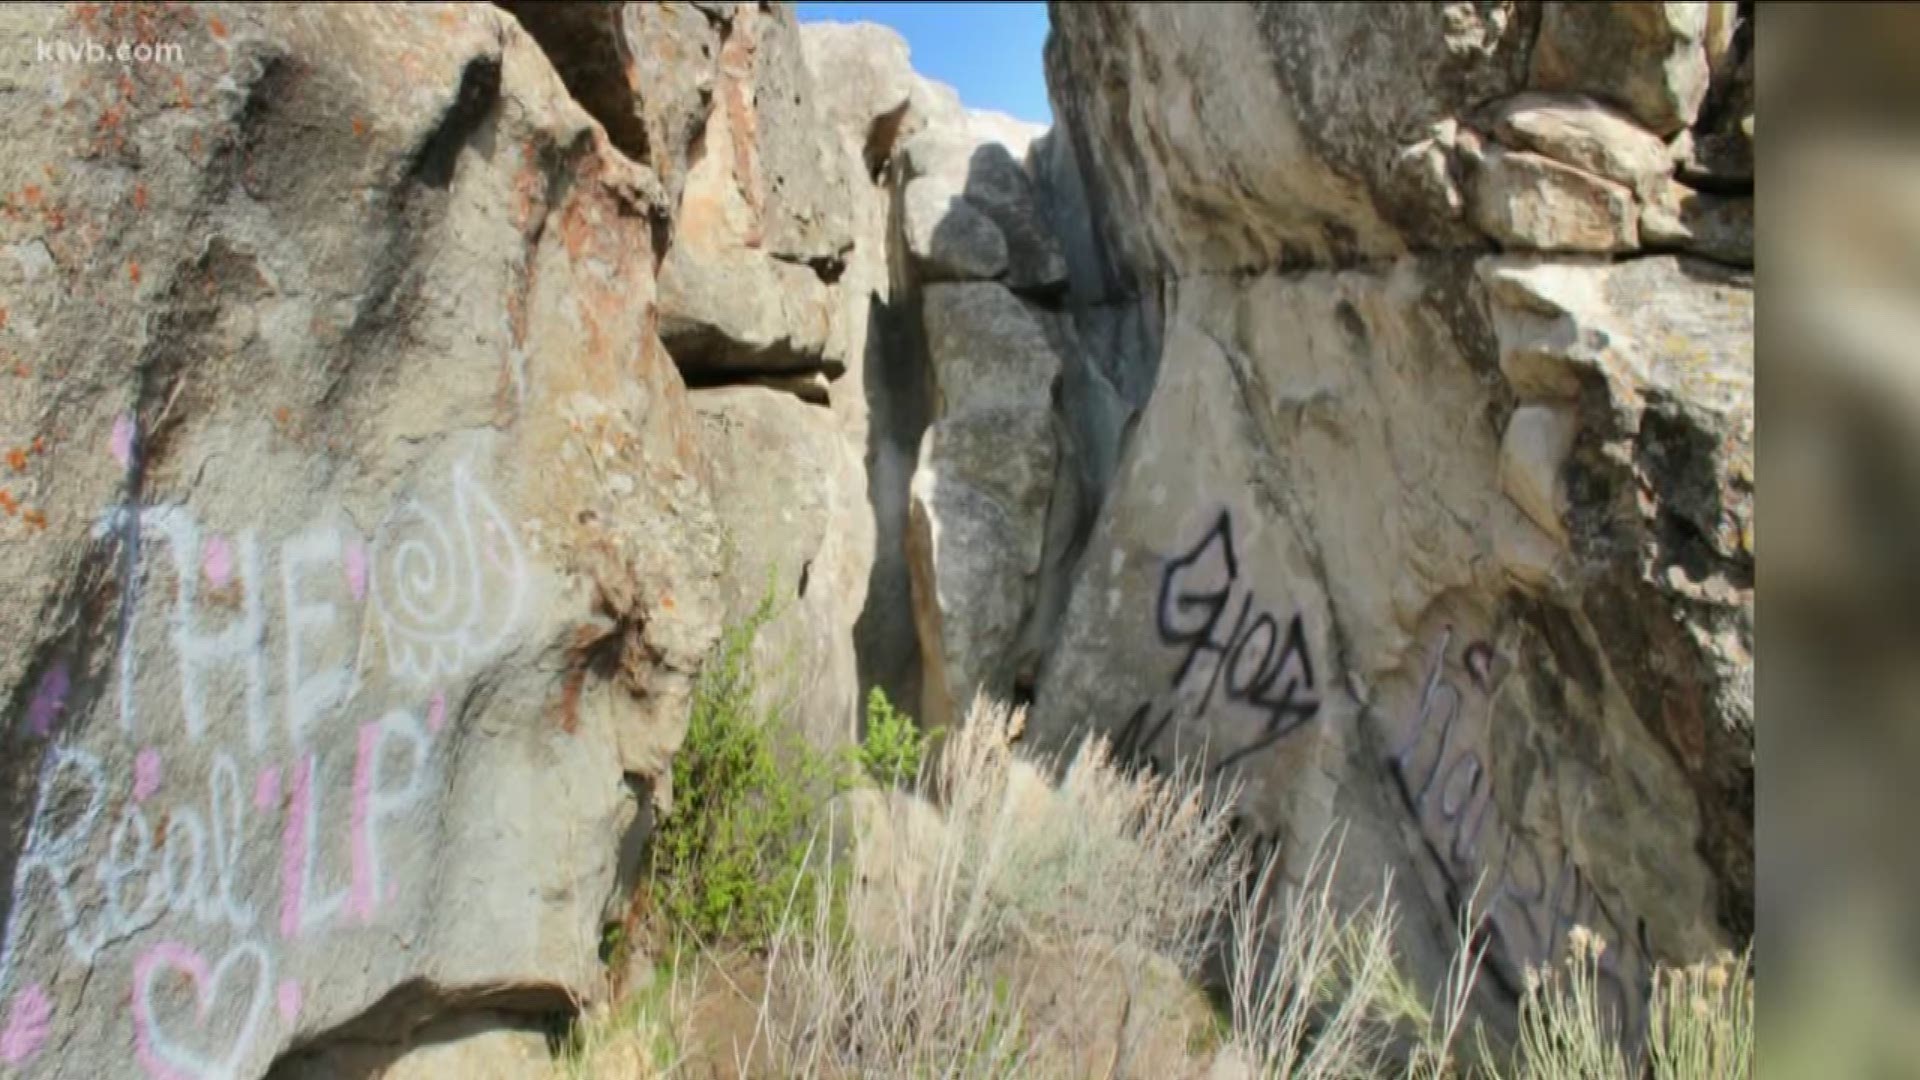 Authorities are looking for the people who vandalized emigrant signatures and prehistoric pictographs at Camp Rock.